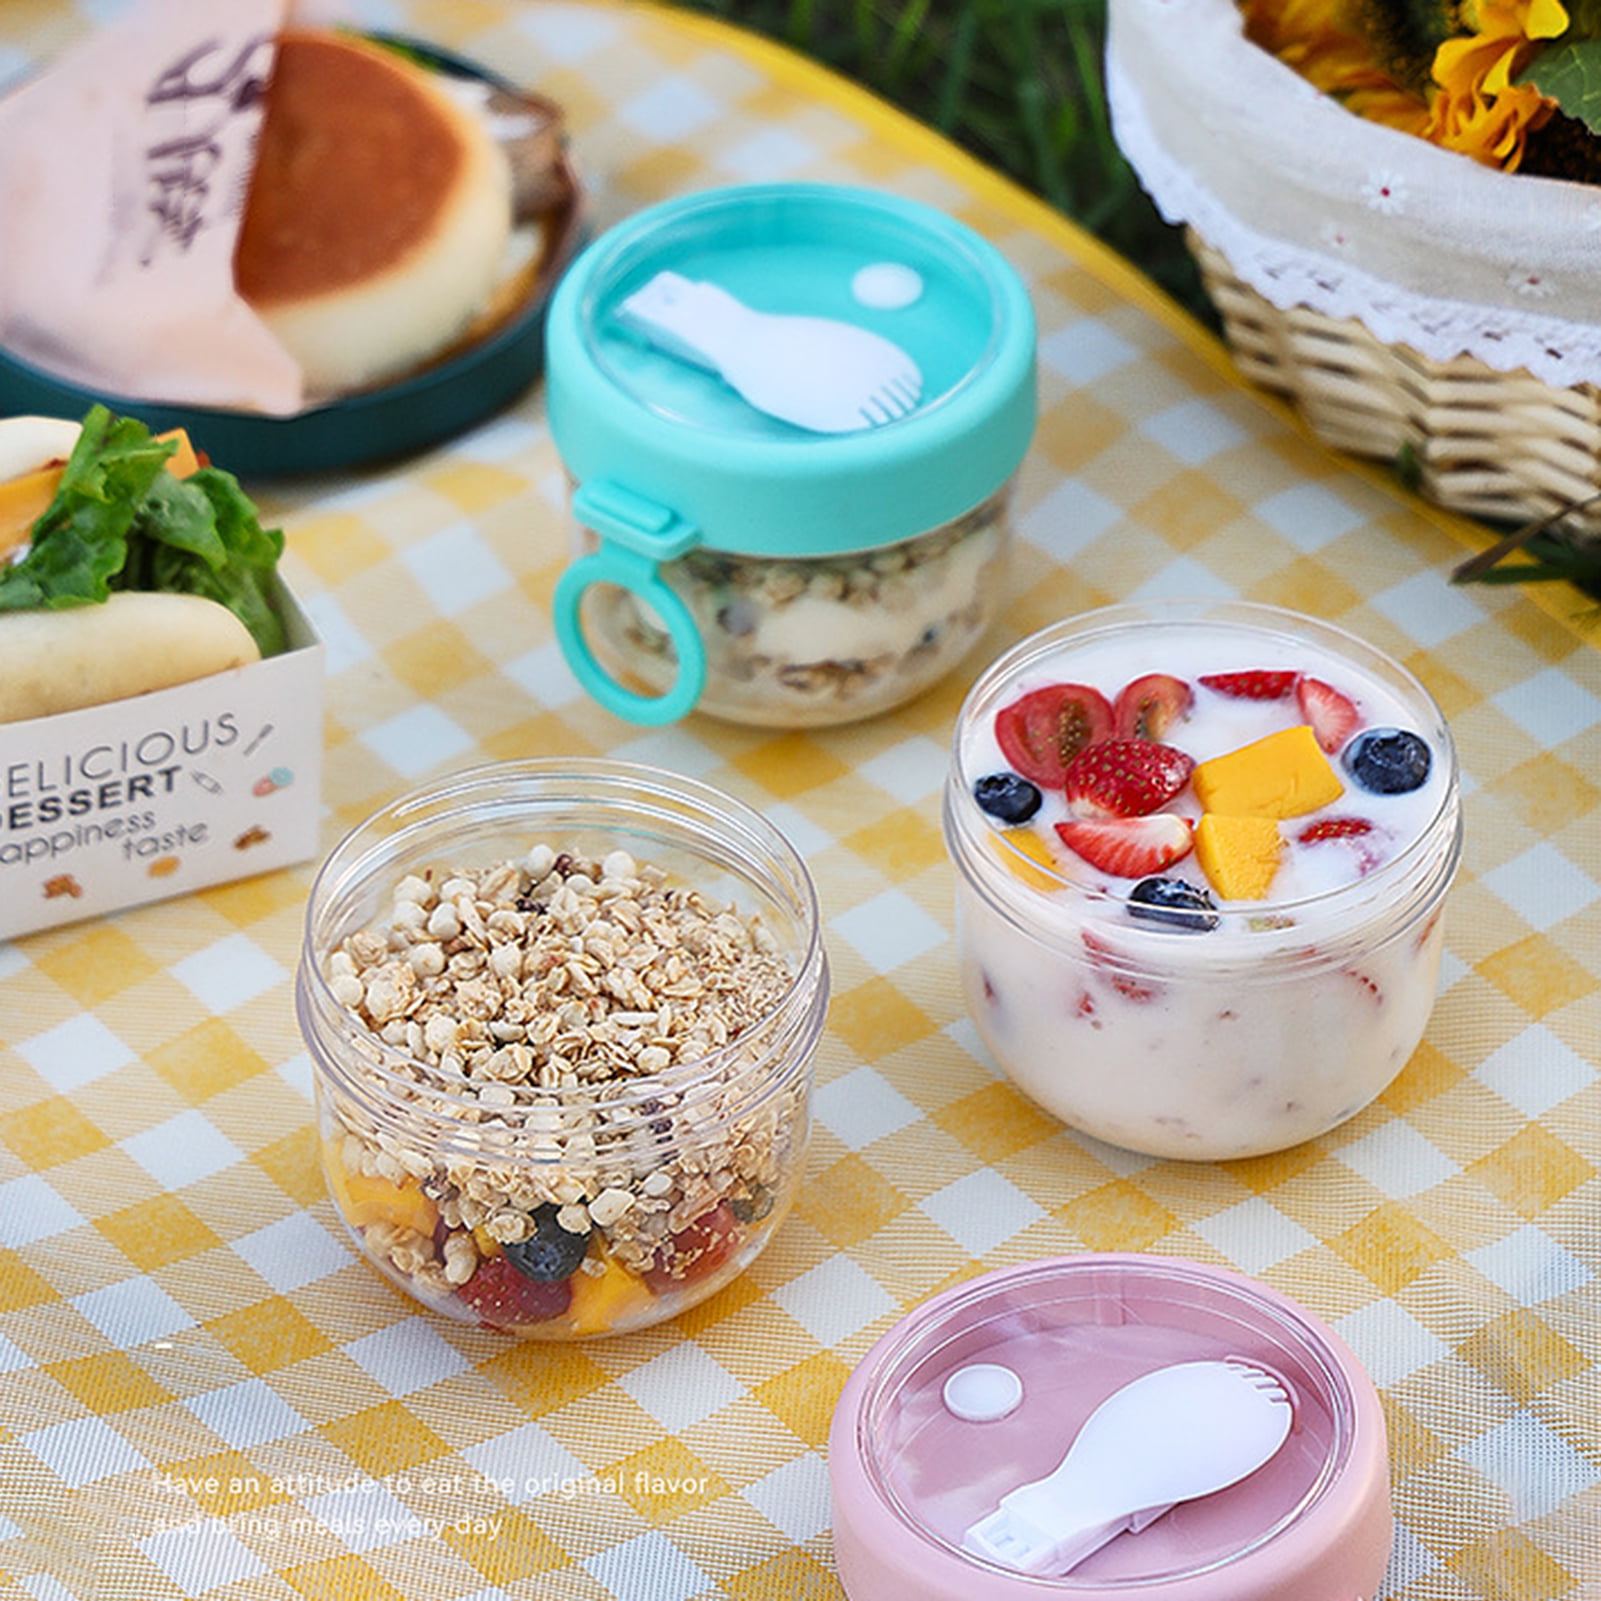 Overnight Oat Containers with Lids and Spoons,Portable Plastic Yogurt Jars 800ml,Leak-proof Dessert Cups for Yogurt Breakfast on The Go Cups, Oatmeal